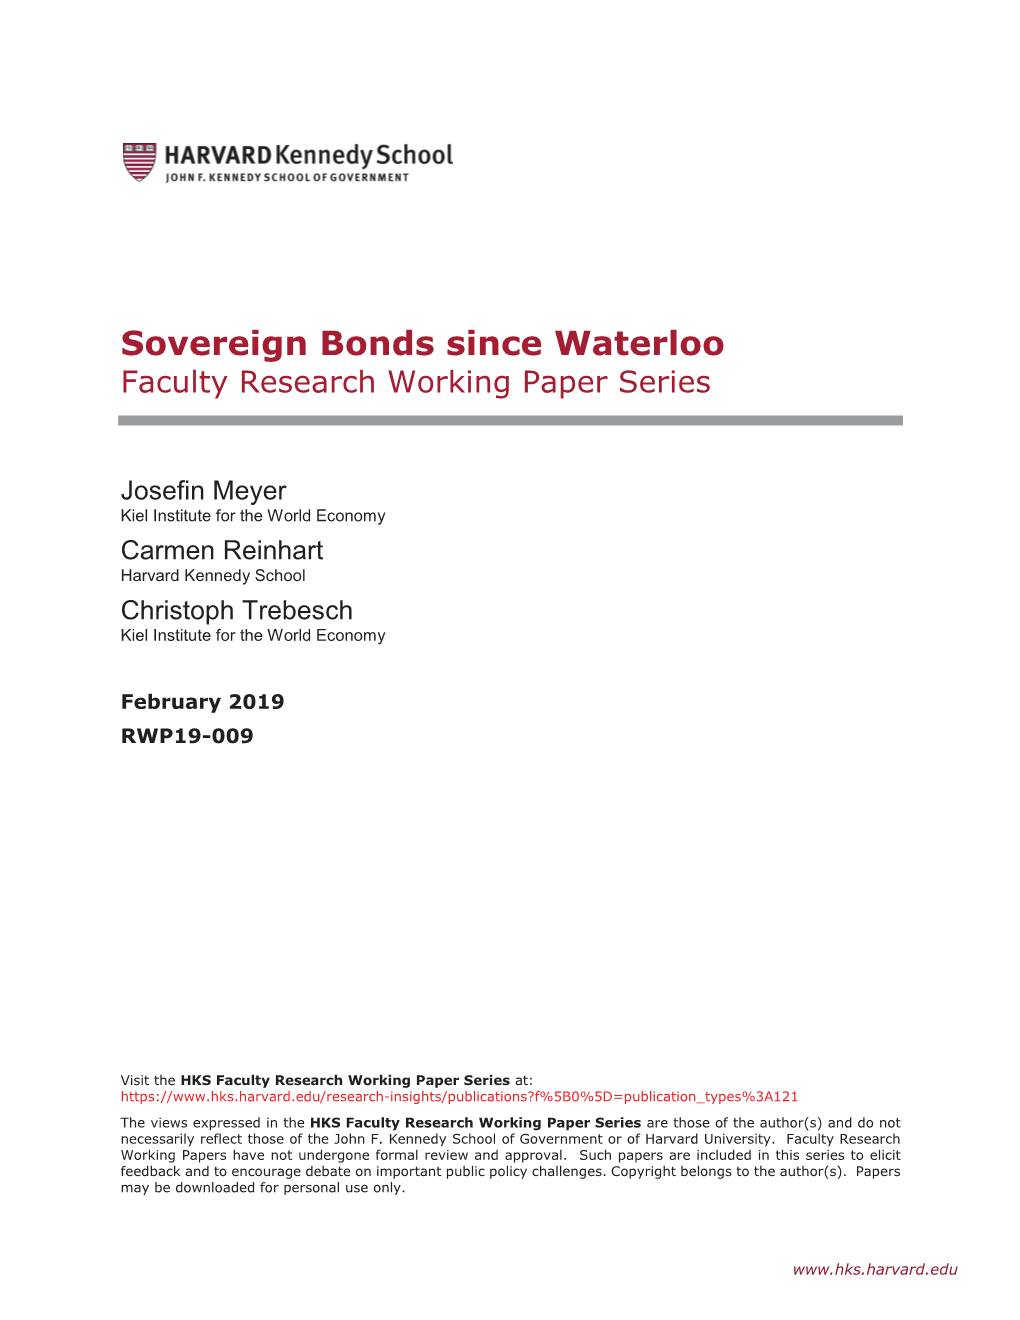 Sovereign Bonds Since Waterloo Faculty Research Working Paper Series